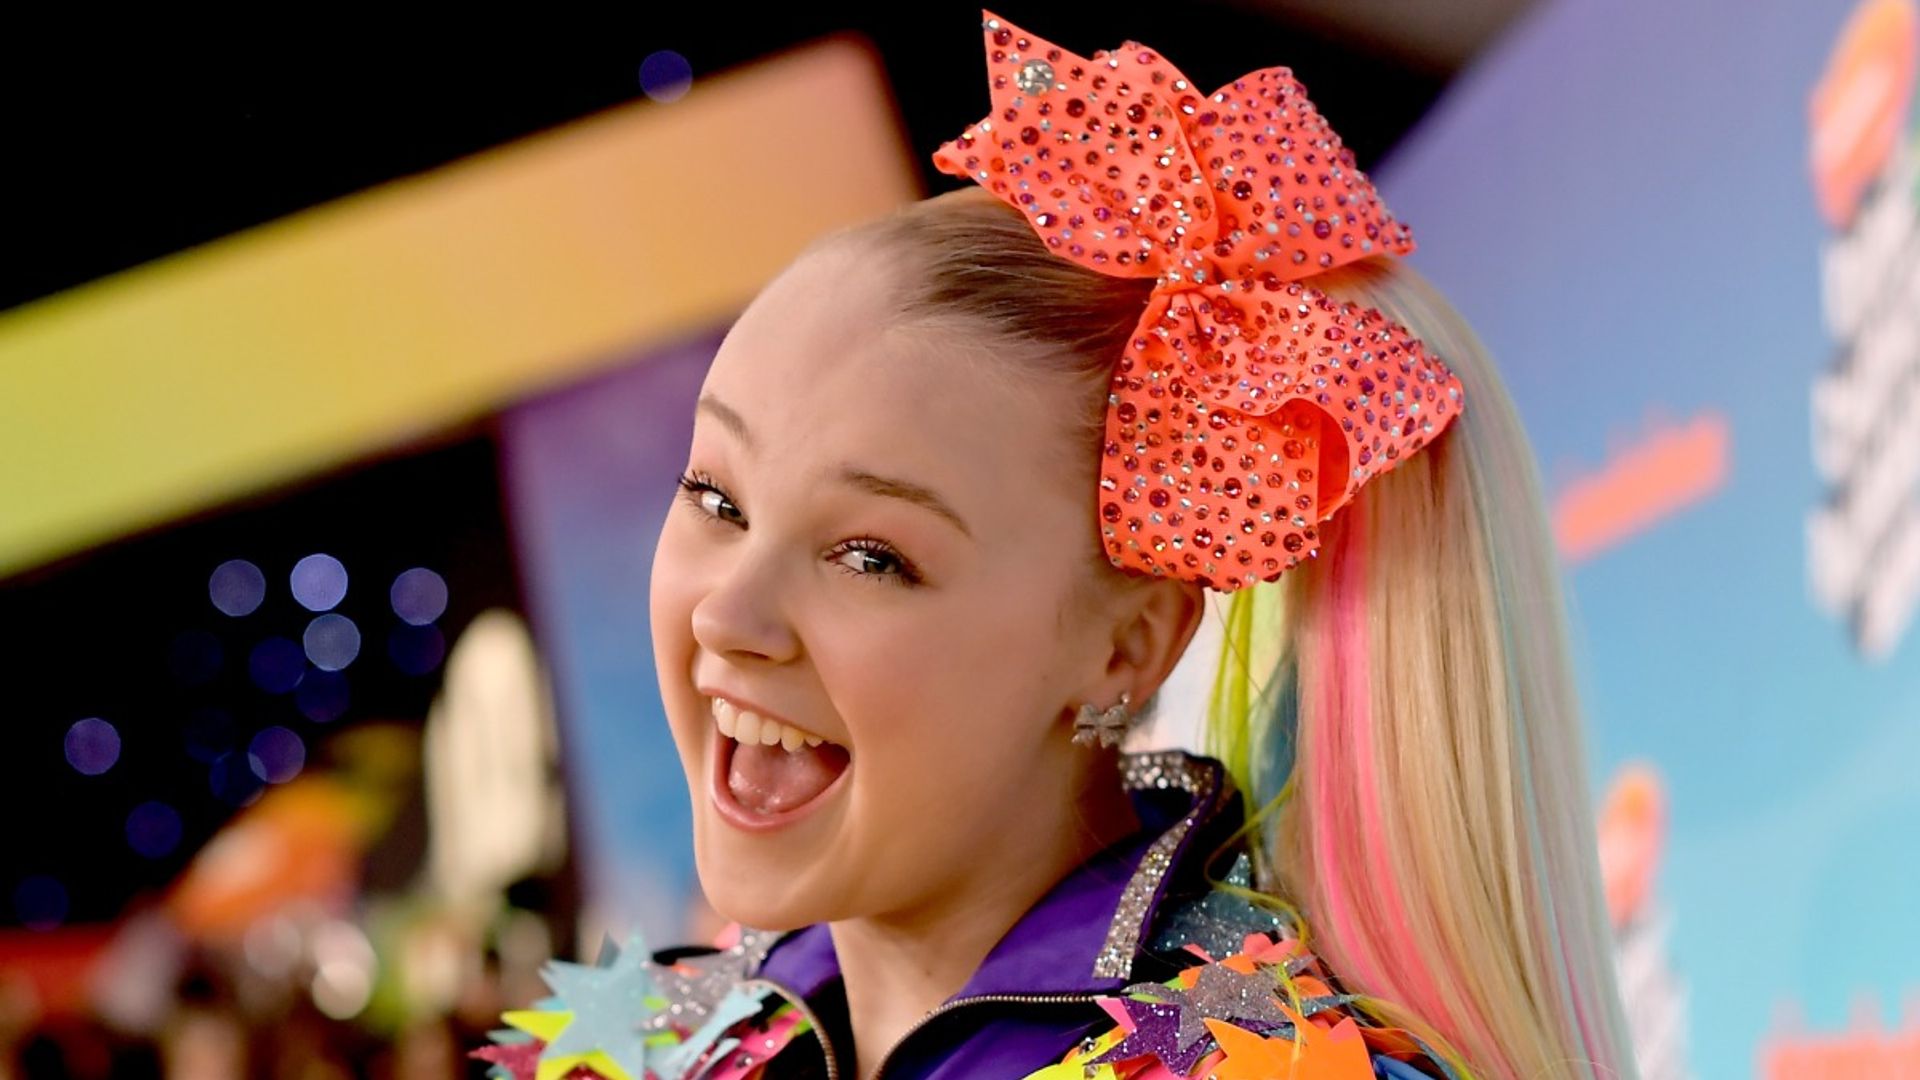 DWTS' JoJo Siwa reveals her plans to embrace a new 'adult' look